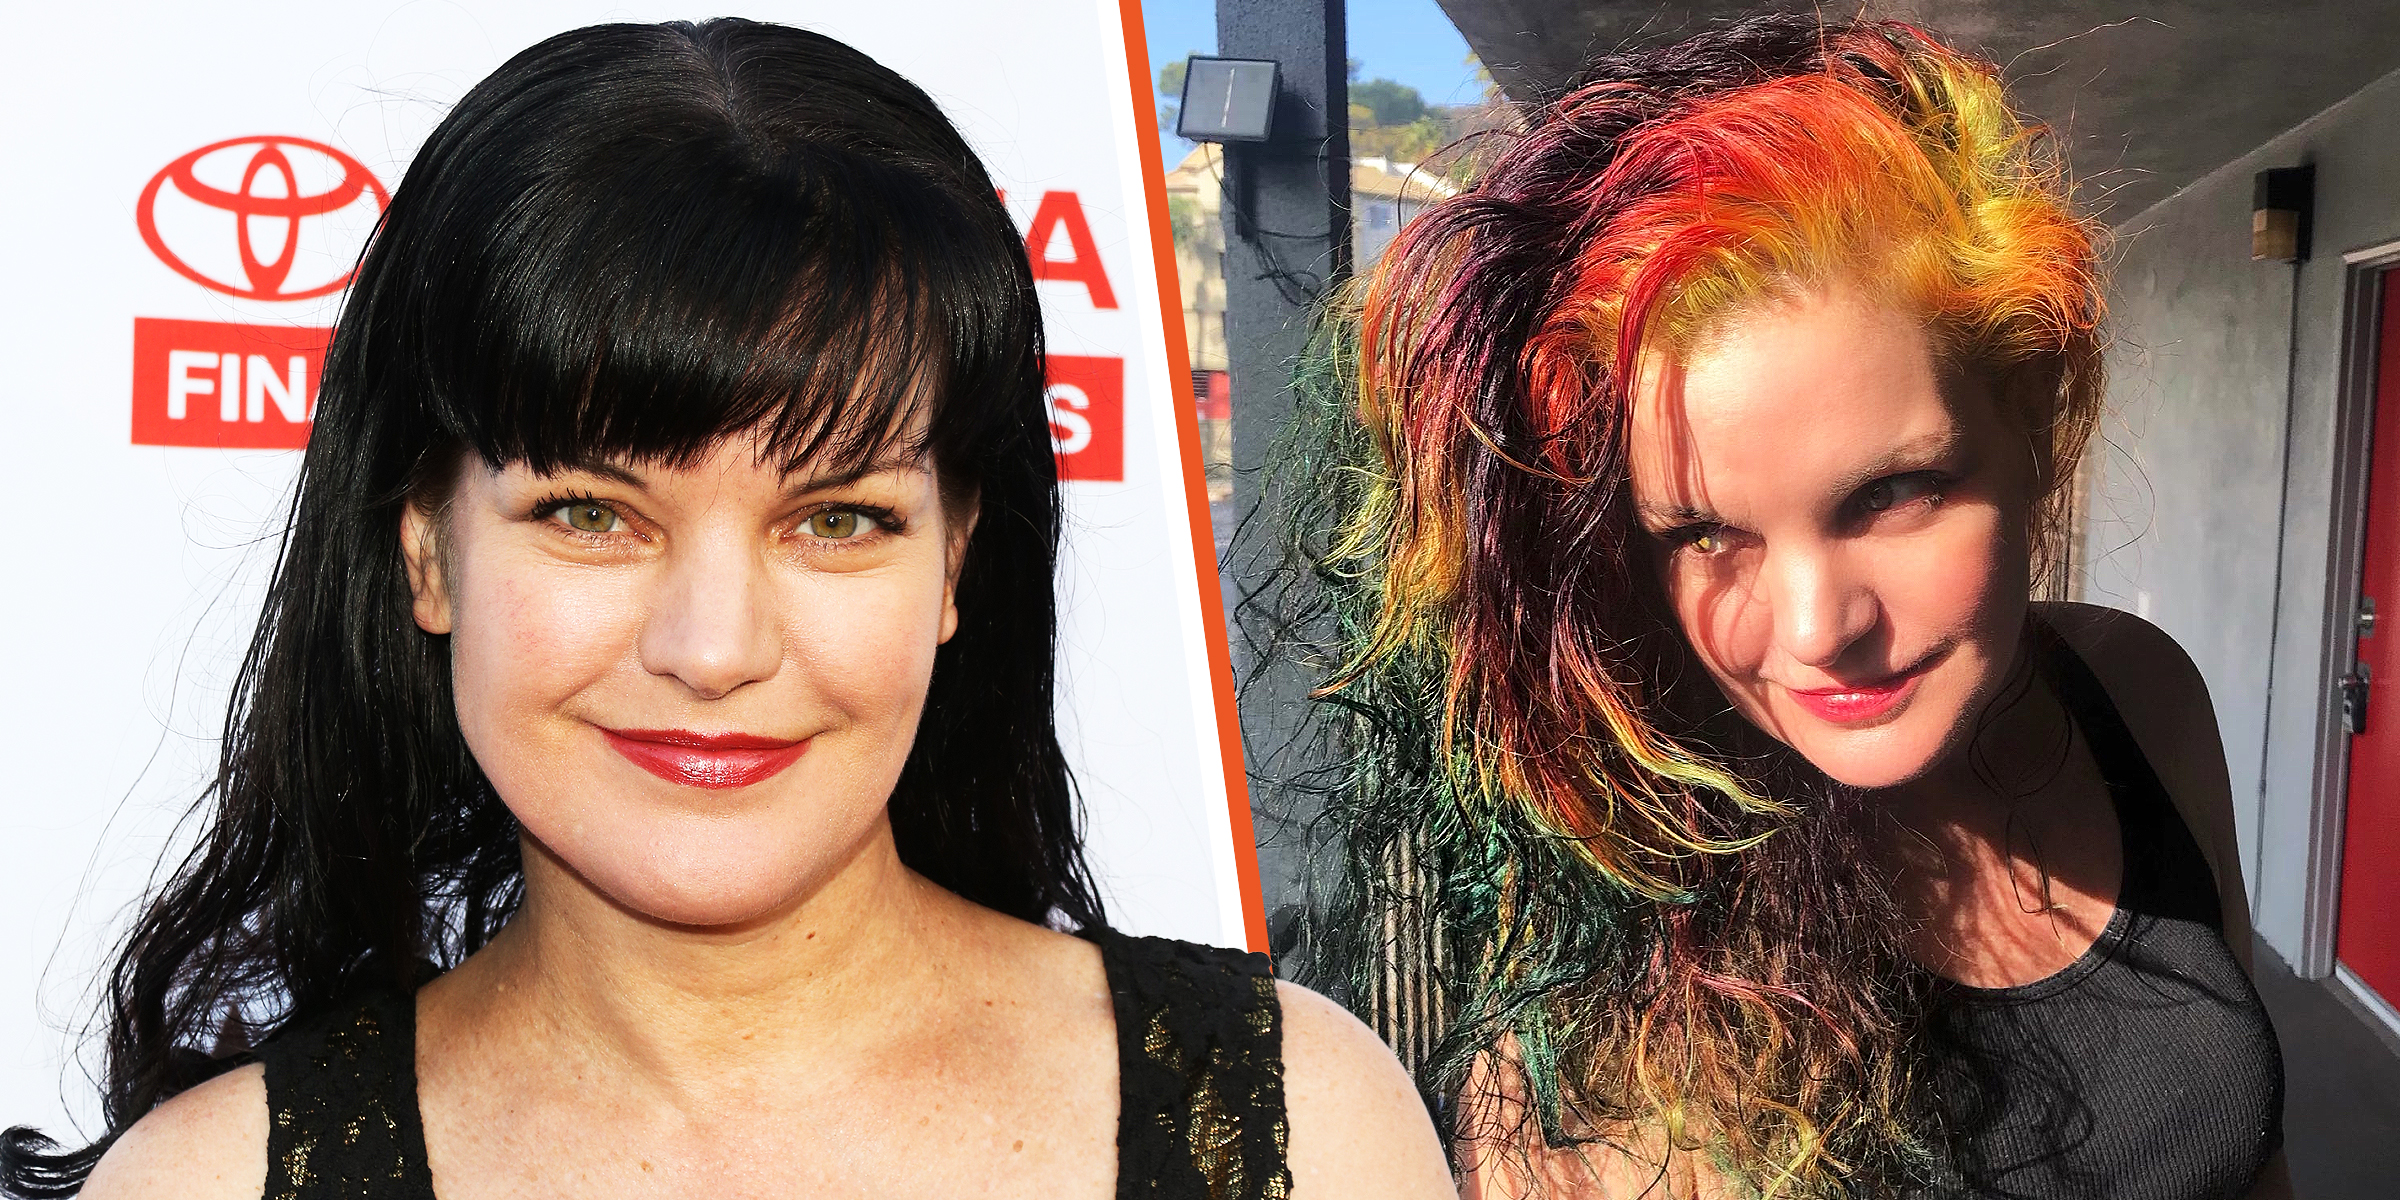 Pauley Perrette, 2016 | Pauley Perrette | Source: Getty Images | Twitter.com/PauleyP